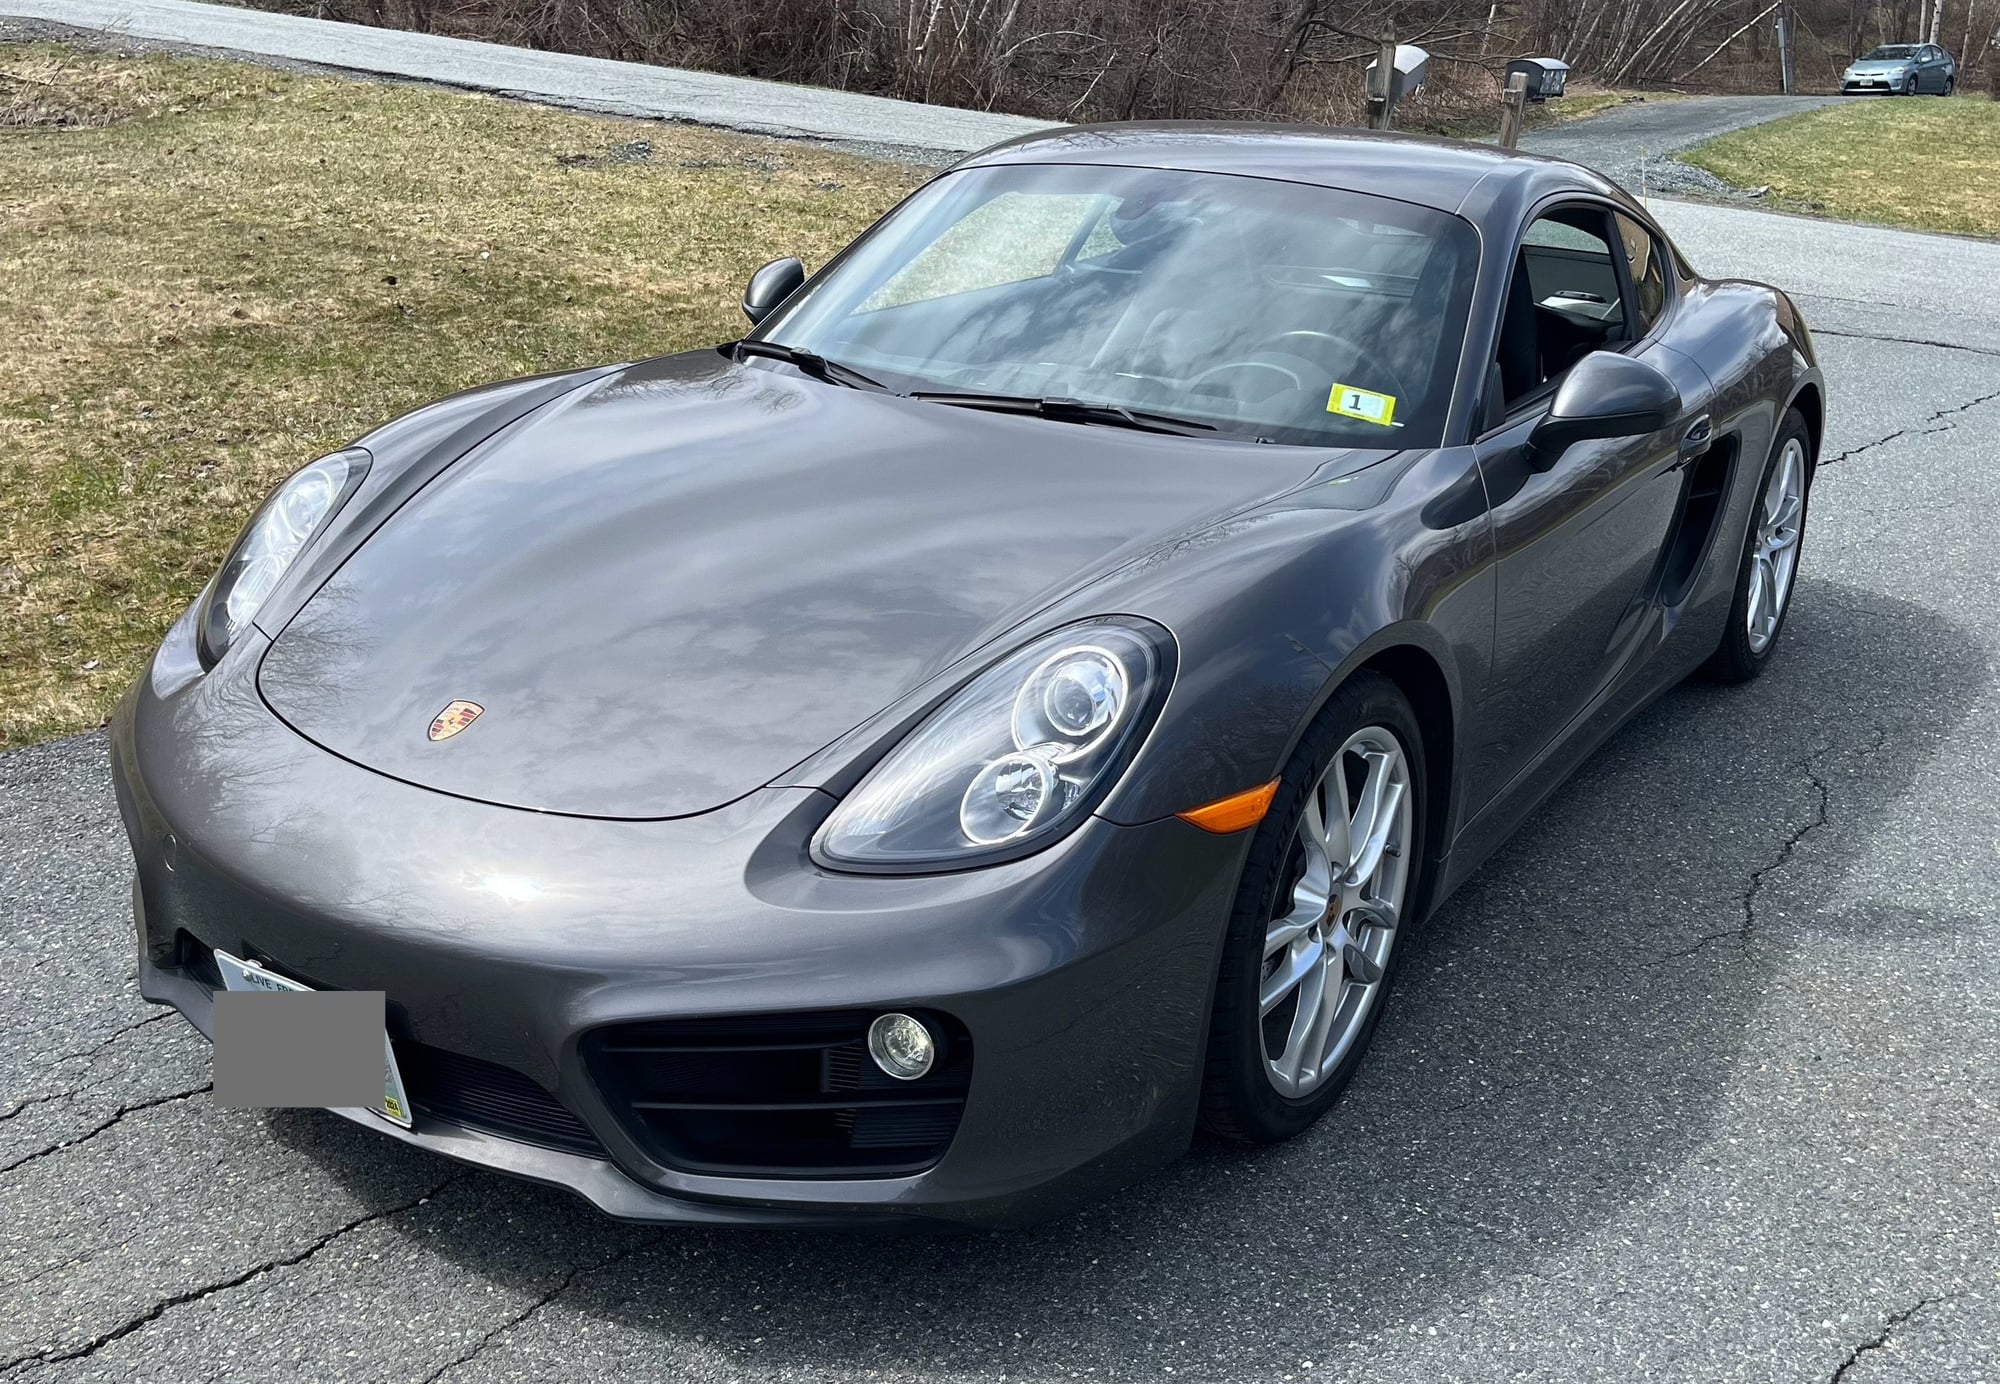 2015 Porsche Cayman - 2015 Porsche Cayman One Owner 6 Speed - Used - VIN WP0AA2A85FK164536 - 6 cyl - 2WD - Manual - Coupe - Gray - Lebanon, NH 03766, United States